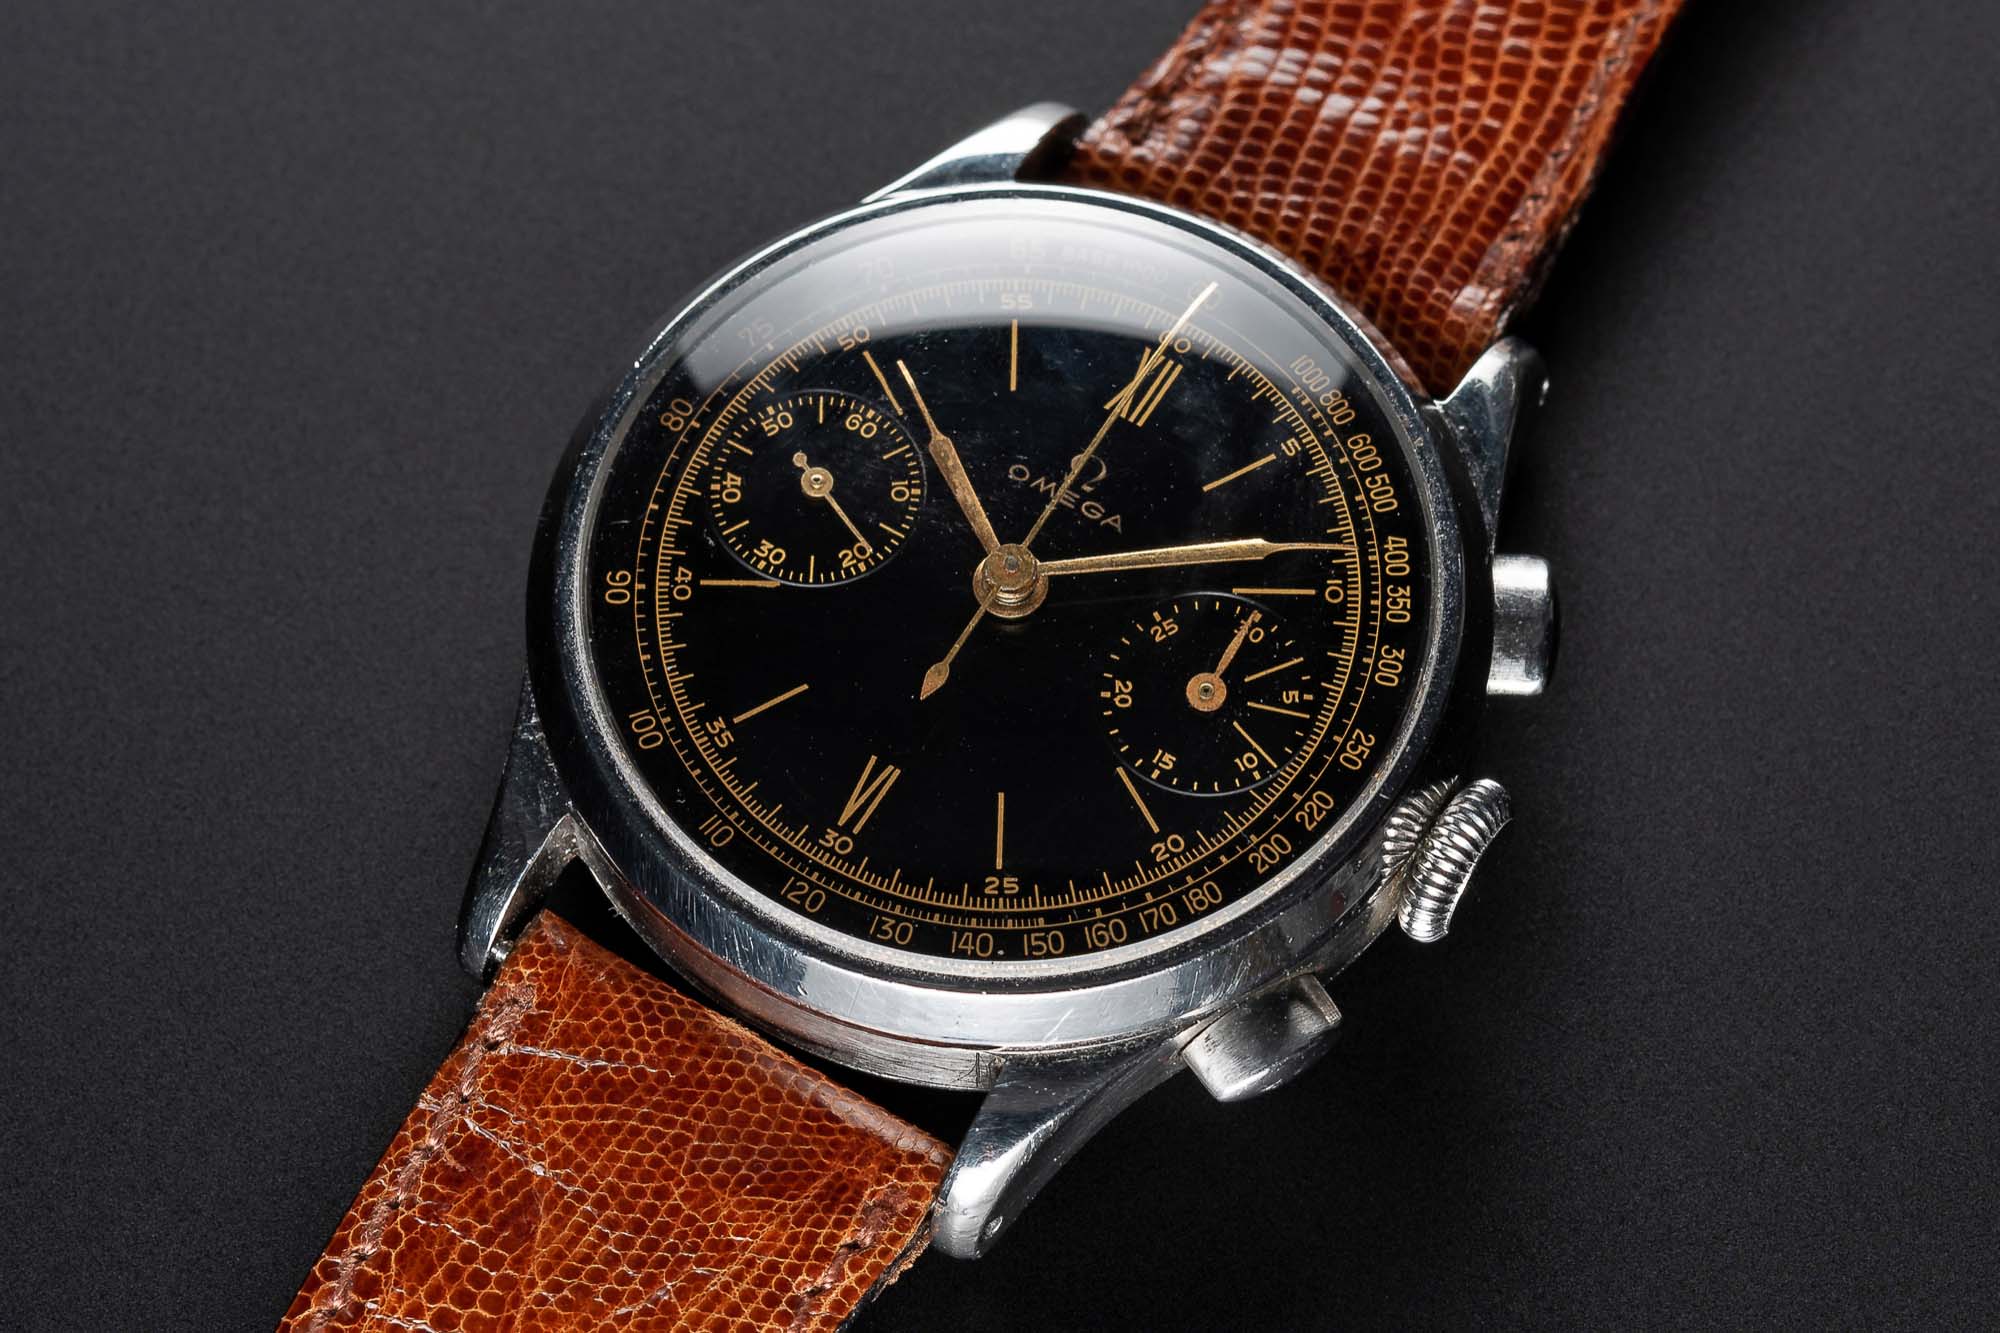 A VERY RARE GENTLEMAN'S LARGE SIZE STAINLESS STEEL OMEGA "33.3" CHRONOGRAPH WRIST WATCH CIRCA